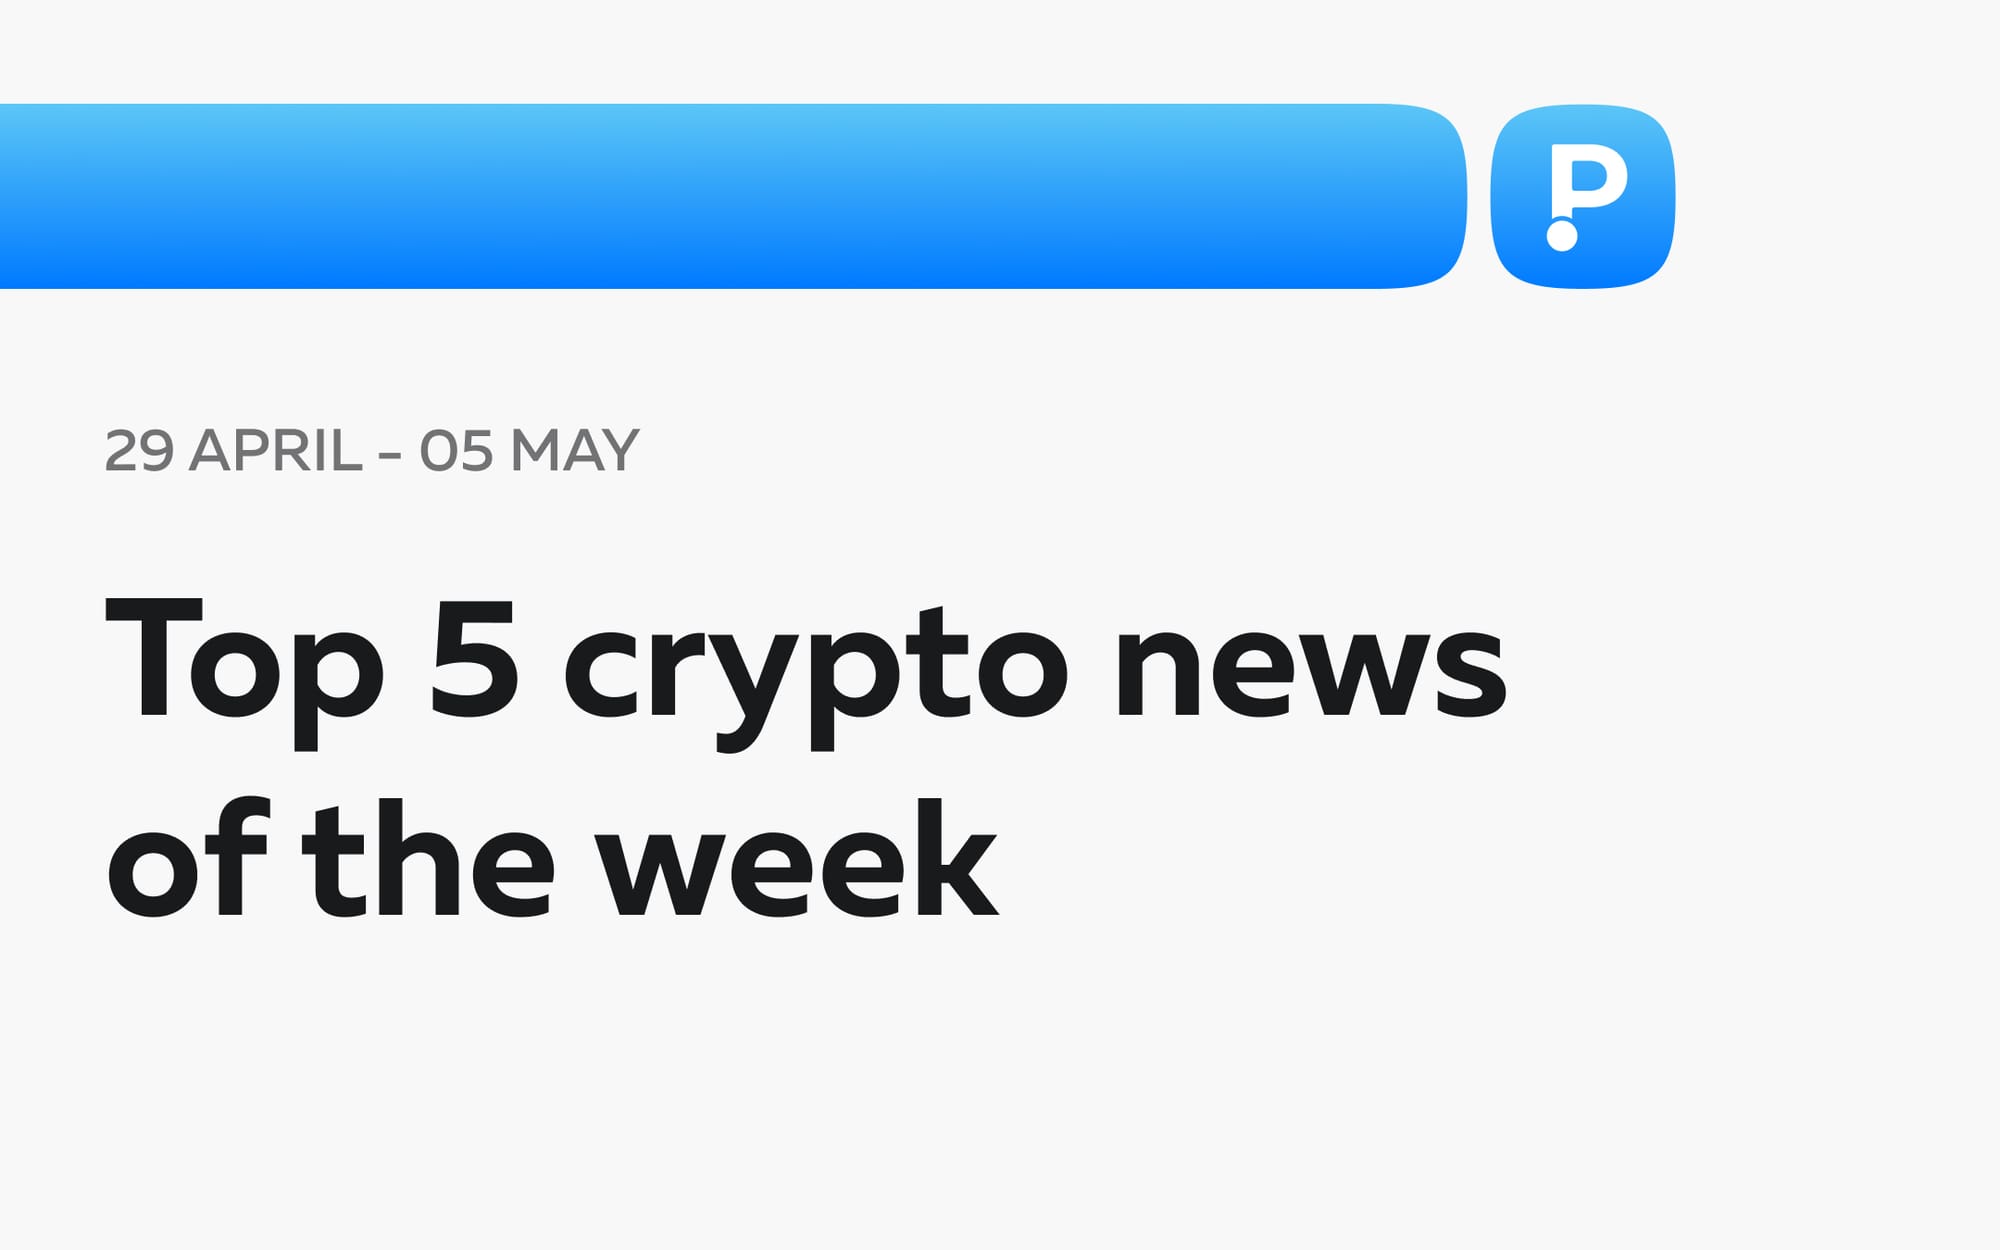 Top-5 crypto news of the week! (29 April - 05 May)